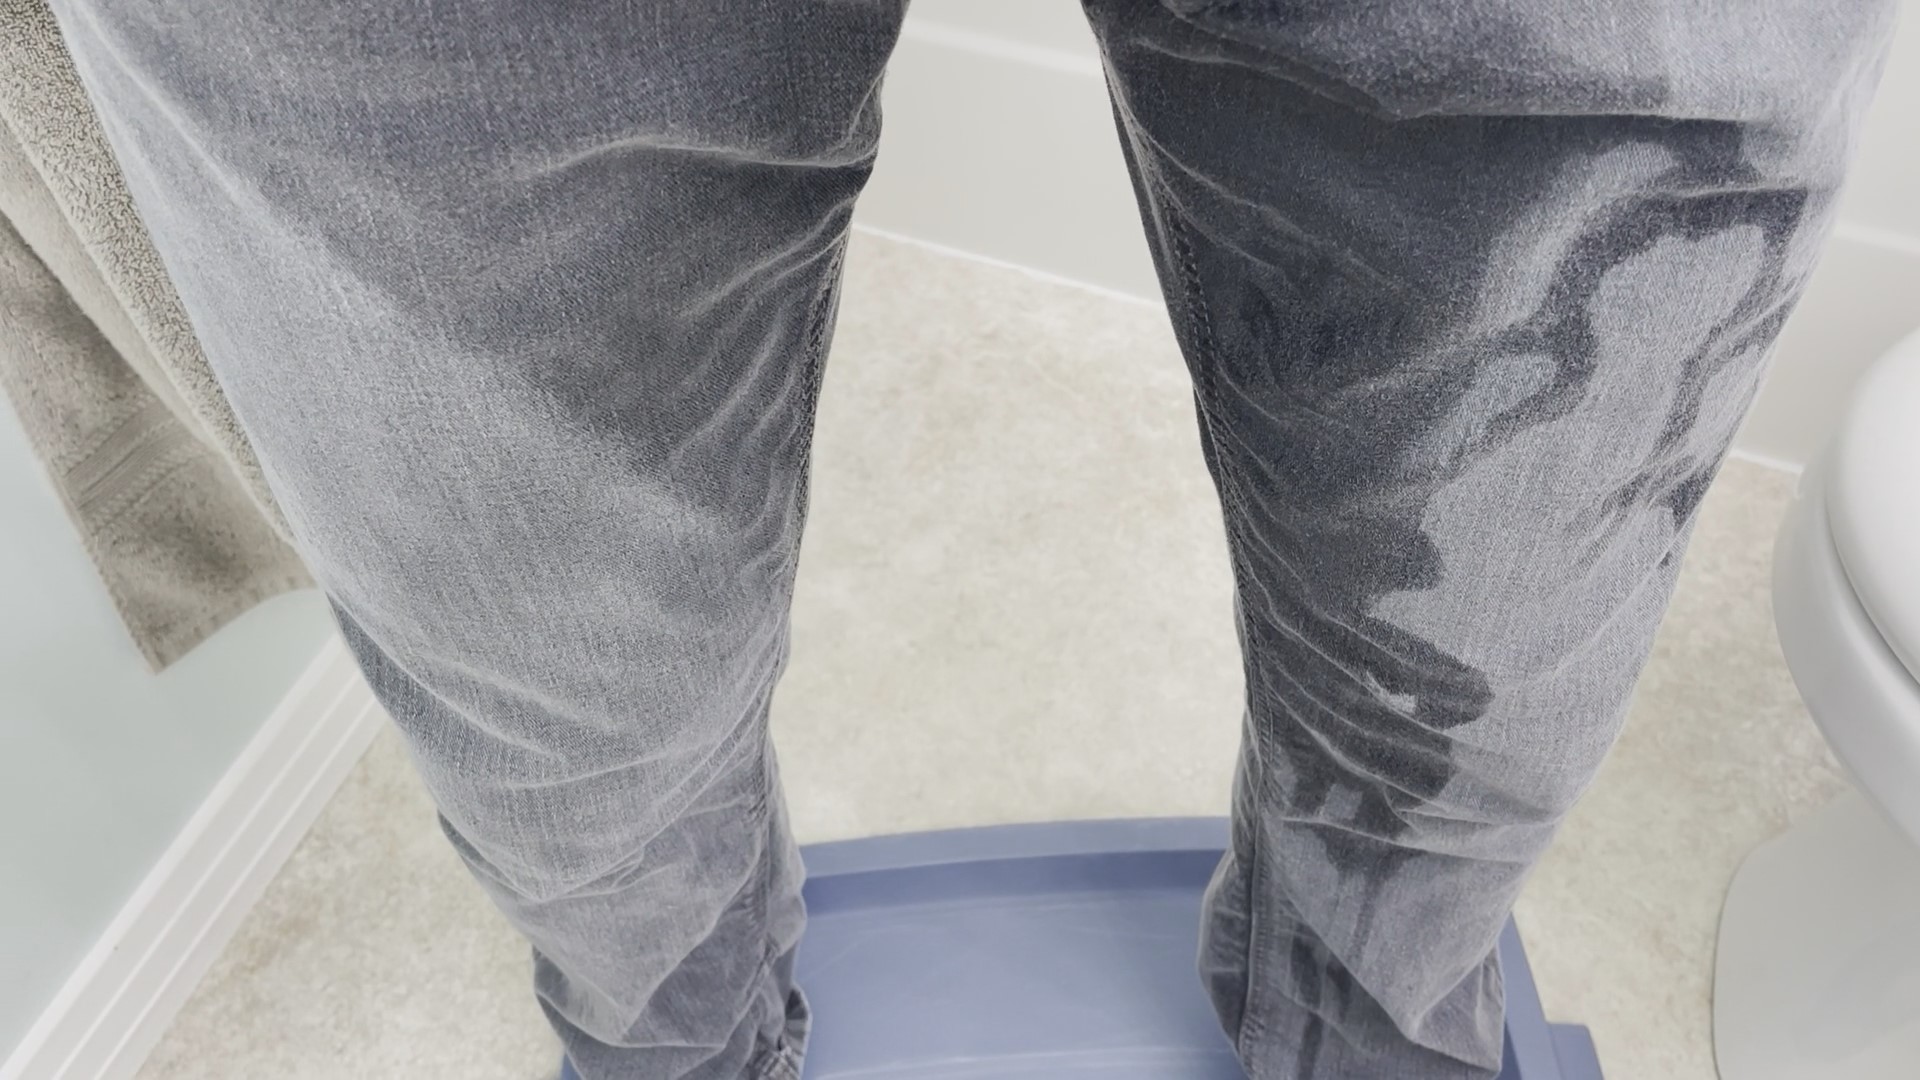 Wet jeans in the bathroom.